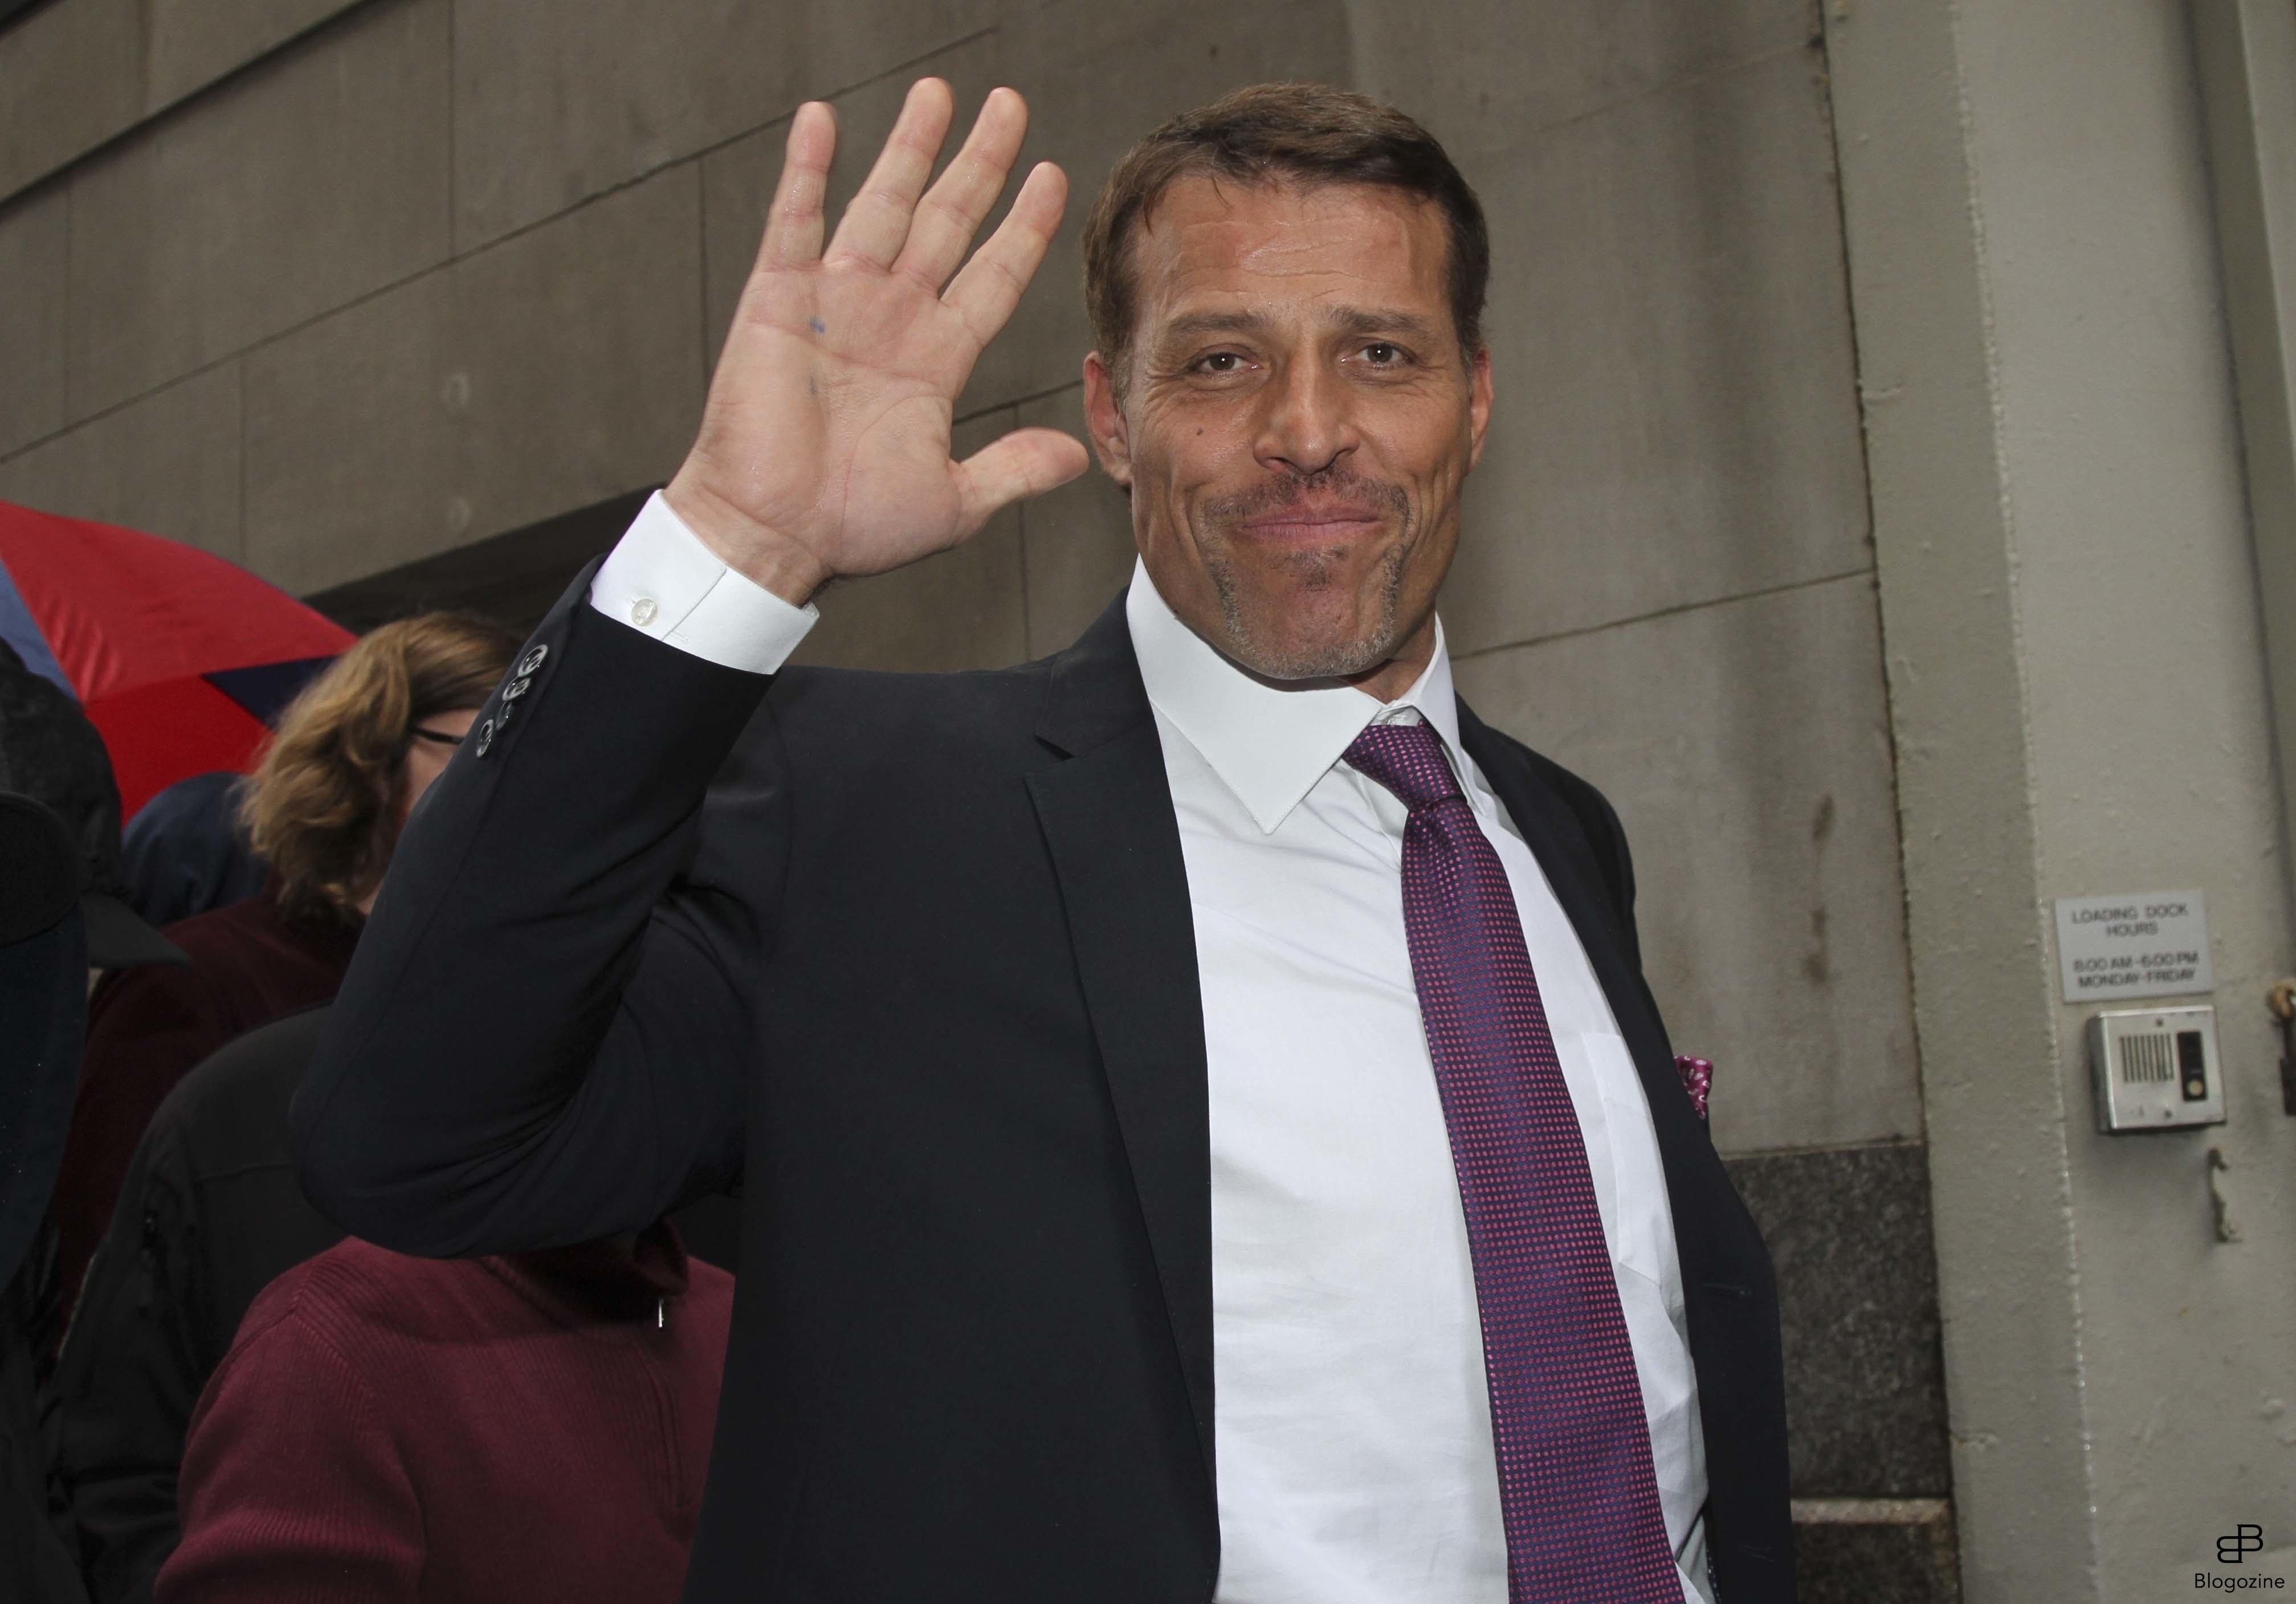 4457121 New York, Nov 06 2015 Author Tony Robbins at HuffPost Live in NYC COPYRIGHT STELLA PICTURES